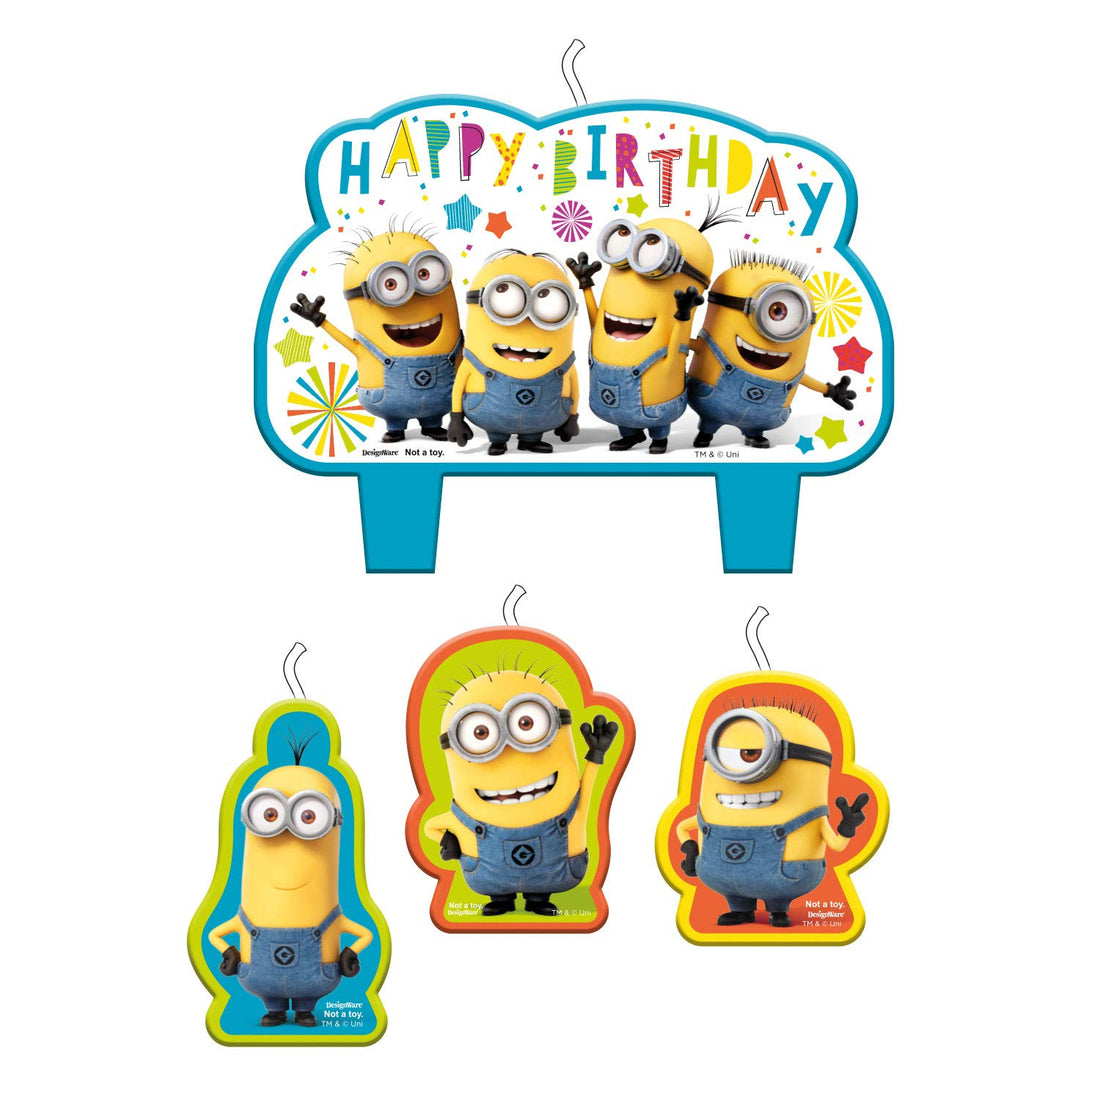 Amscan 9907322 - Officially Licensed Despicable Me Minions Happy Birthday Cake Candles Set - 4 Pack